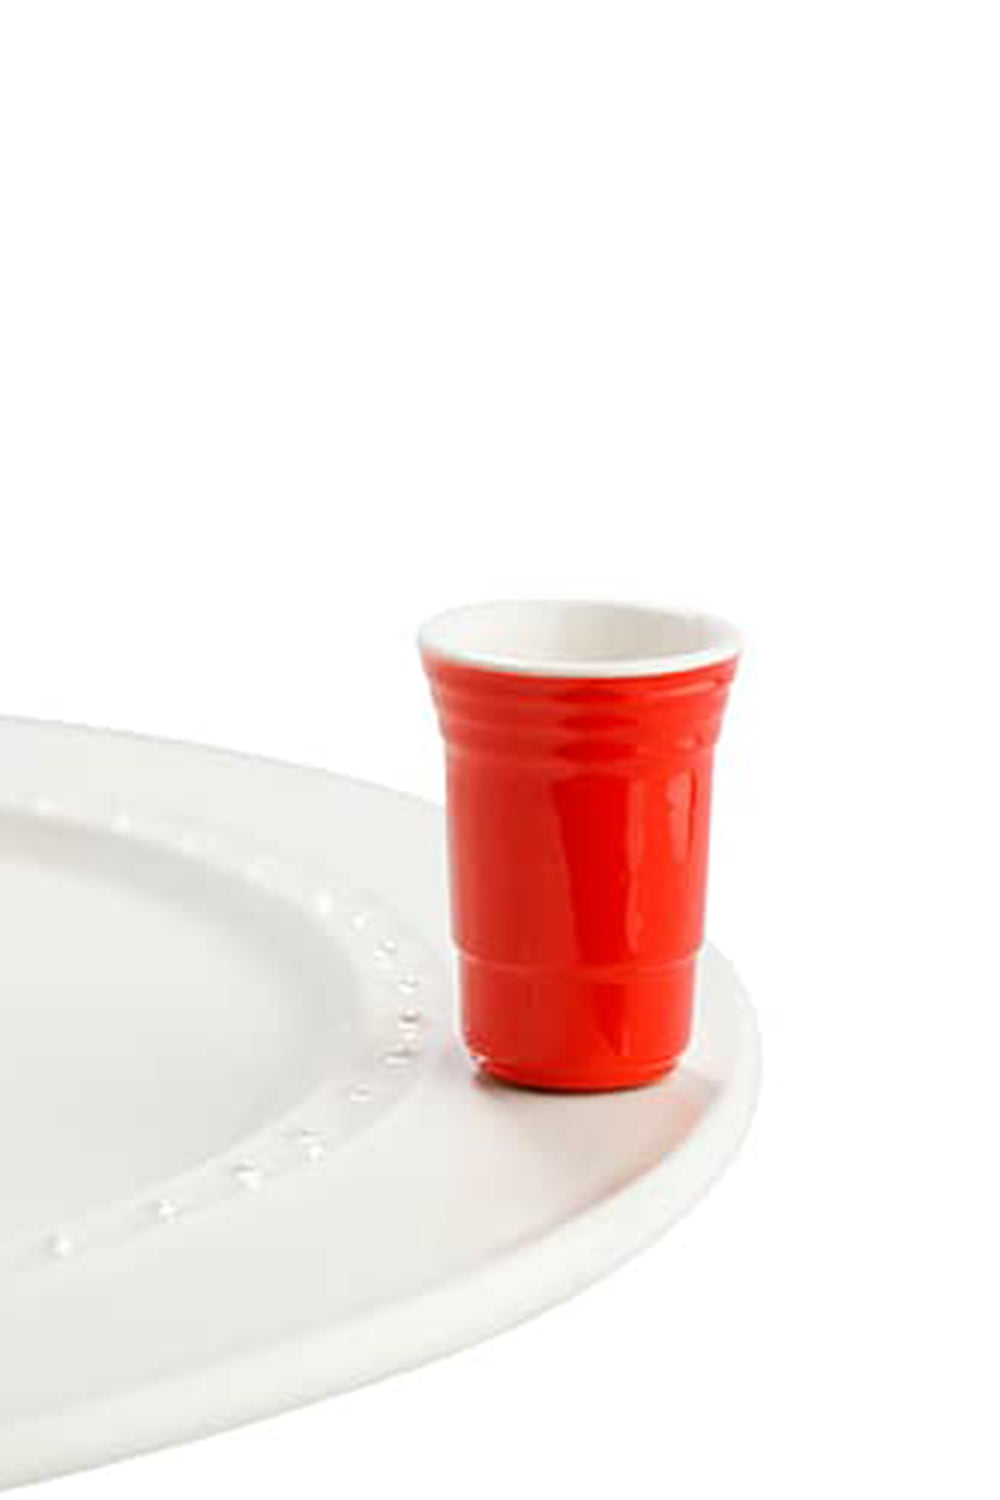 Nora Fleming Mini Attachment - Fill Me Up Red Solo Cup